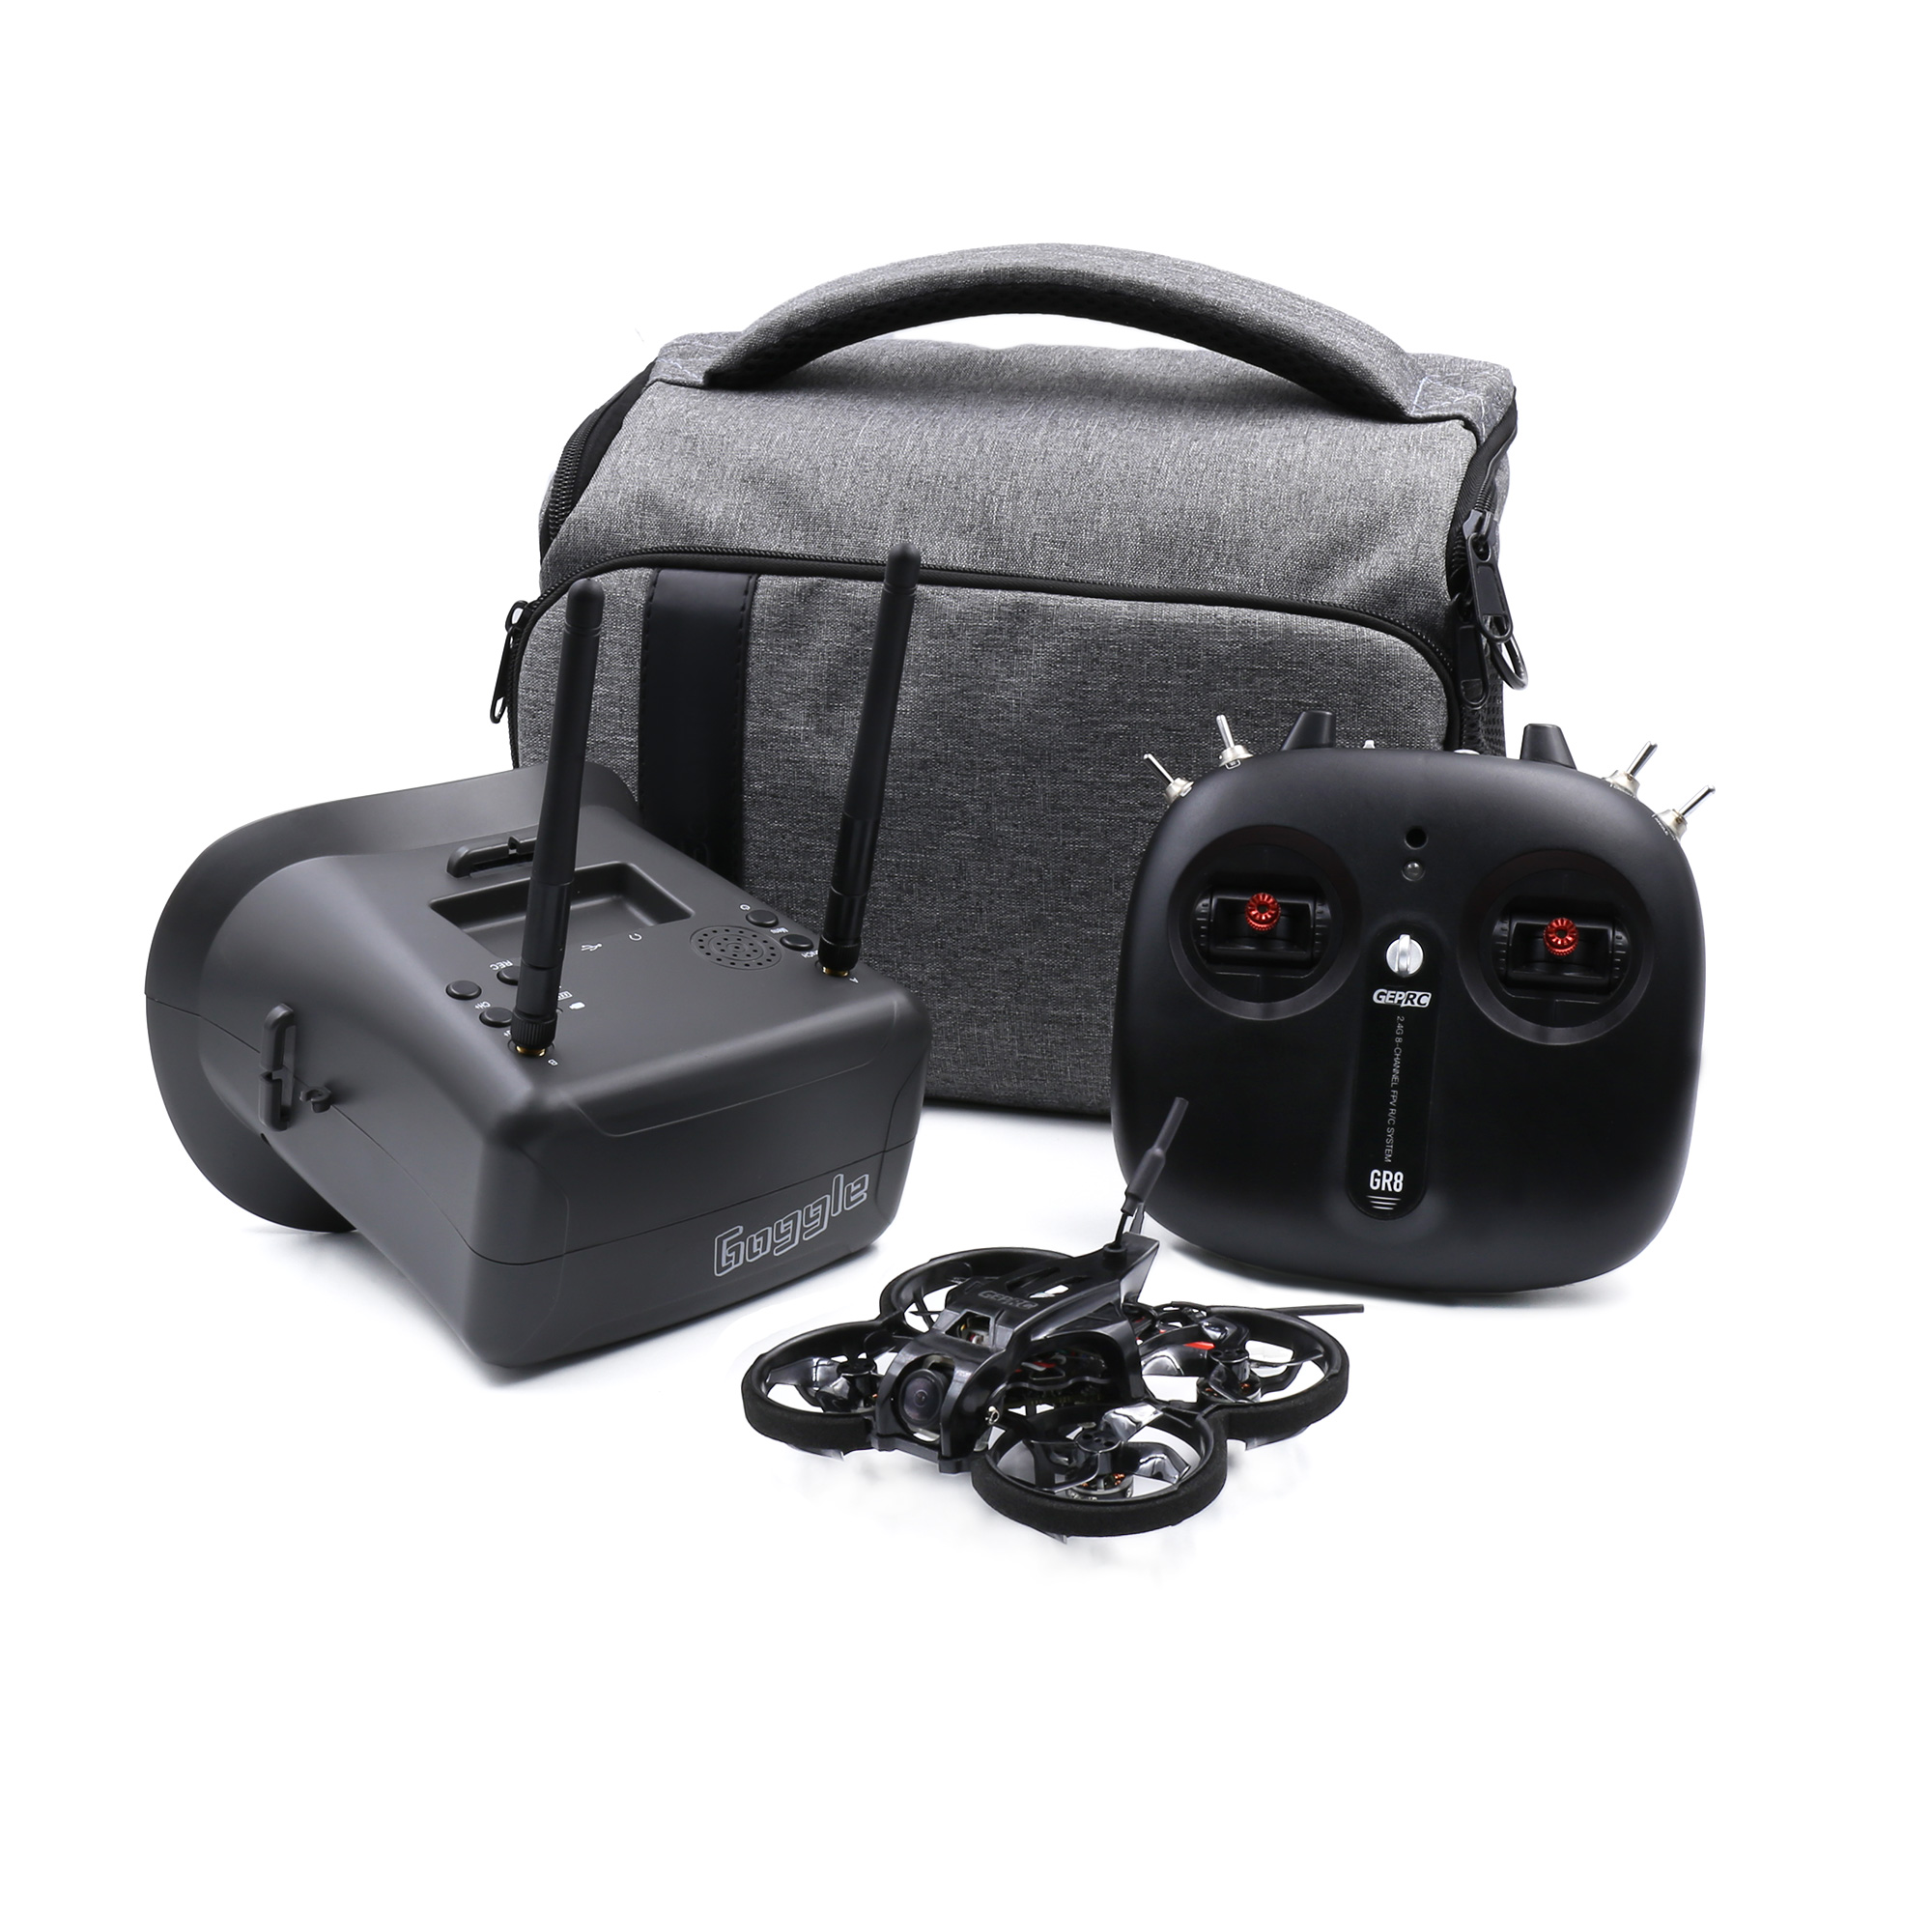 GEPRC-TinyGO-16inch-2S-FPV-Indoor-Whoop-Runcam-Nano2-GR8-Remote-ControllerRG1-Goggles-RTF-Ready-To-F-1788771-3